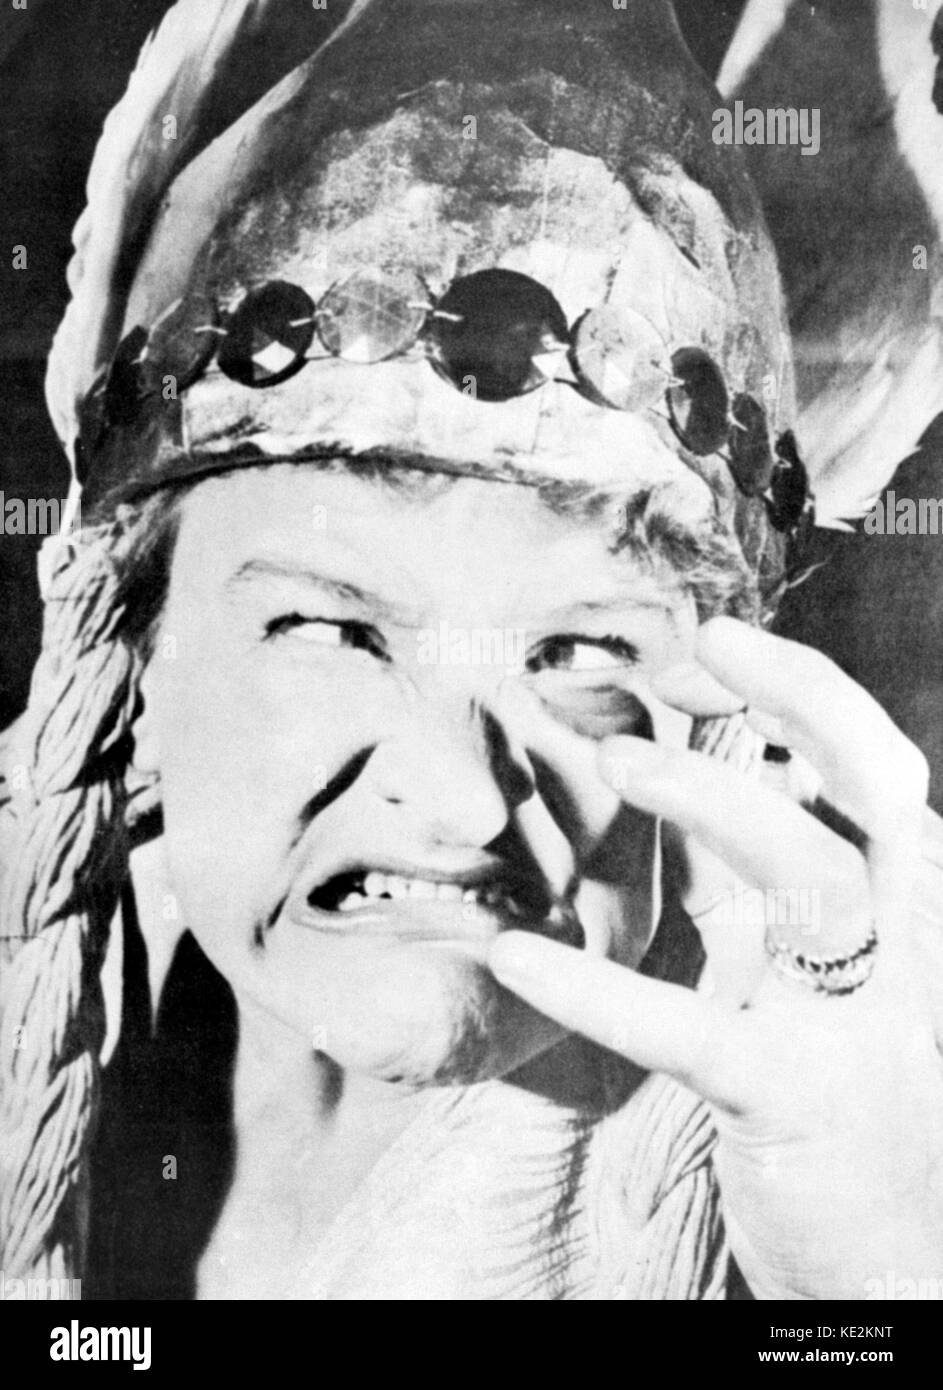 Anna Russell - close up portrait of the English comedian, actress and singer dressed up as a Wagnerian heroine b. 27 December 1911.  With long braids, a head dress.  Mocking.  Wagner.  Making a face.  Cross eyed. Stock Photo